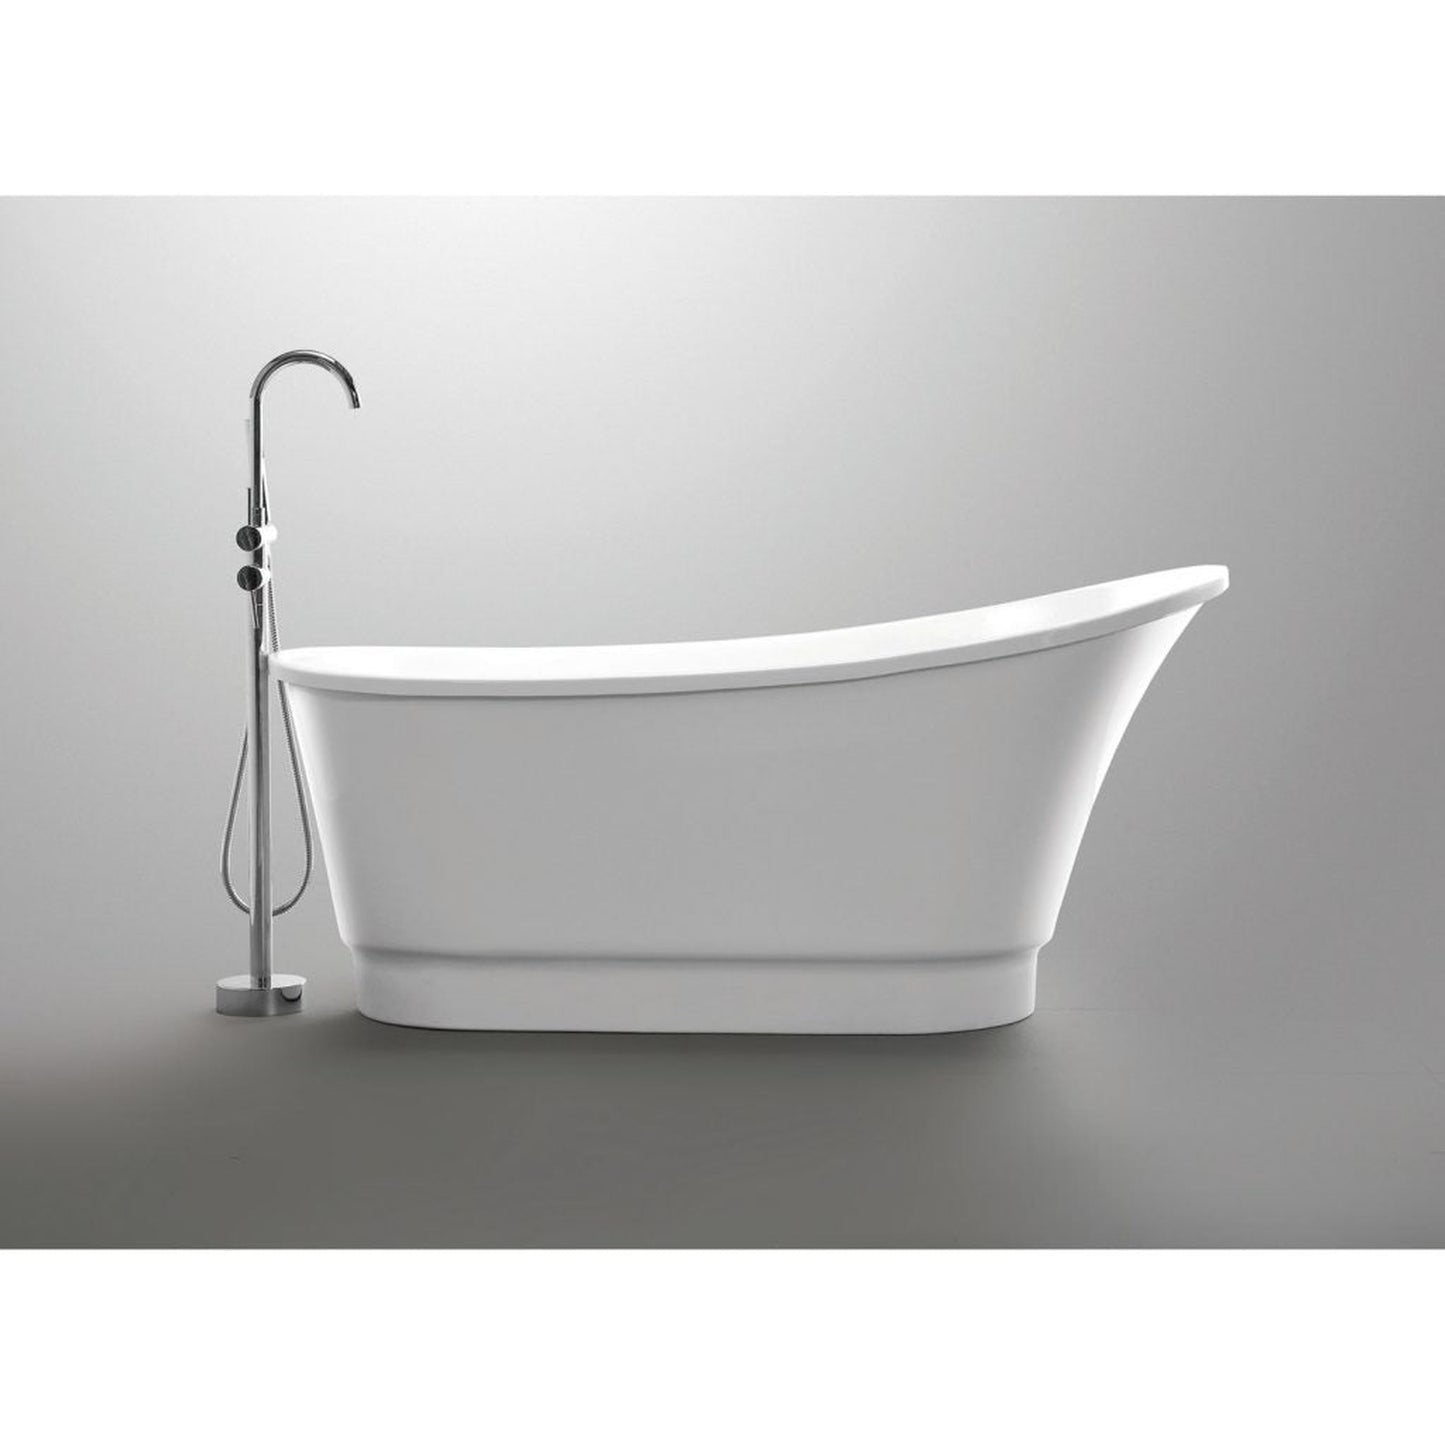 ANZZI Prima Series 67" x 31" Glossy White Freestanding Bathtub With Built-In Overflow and Pop-Up Drain